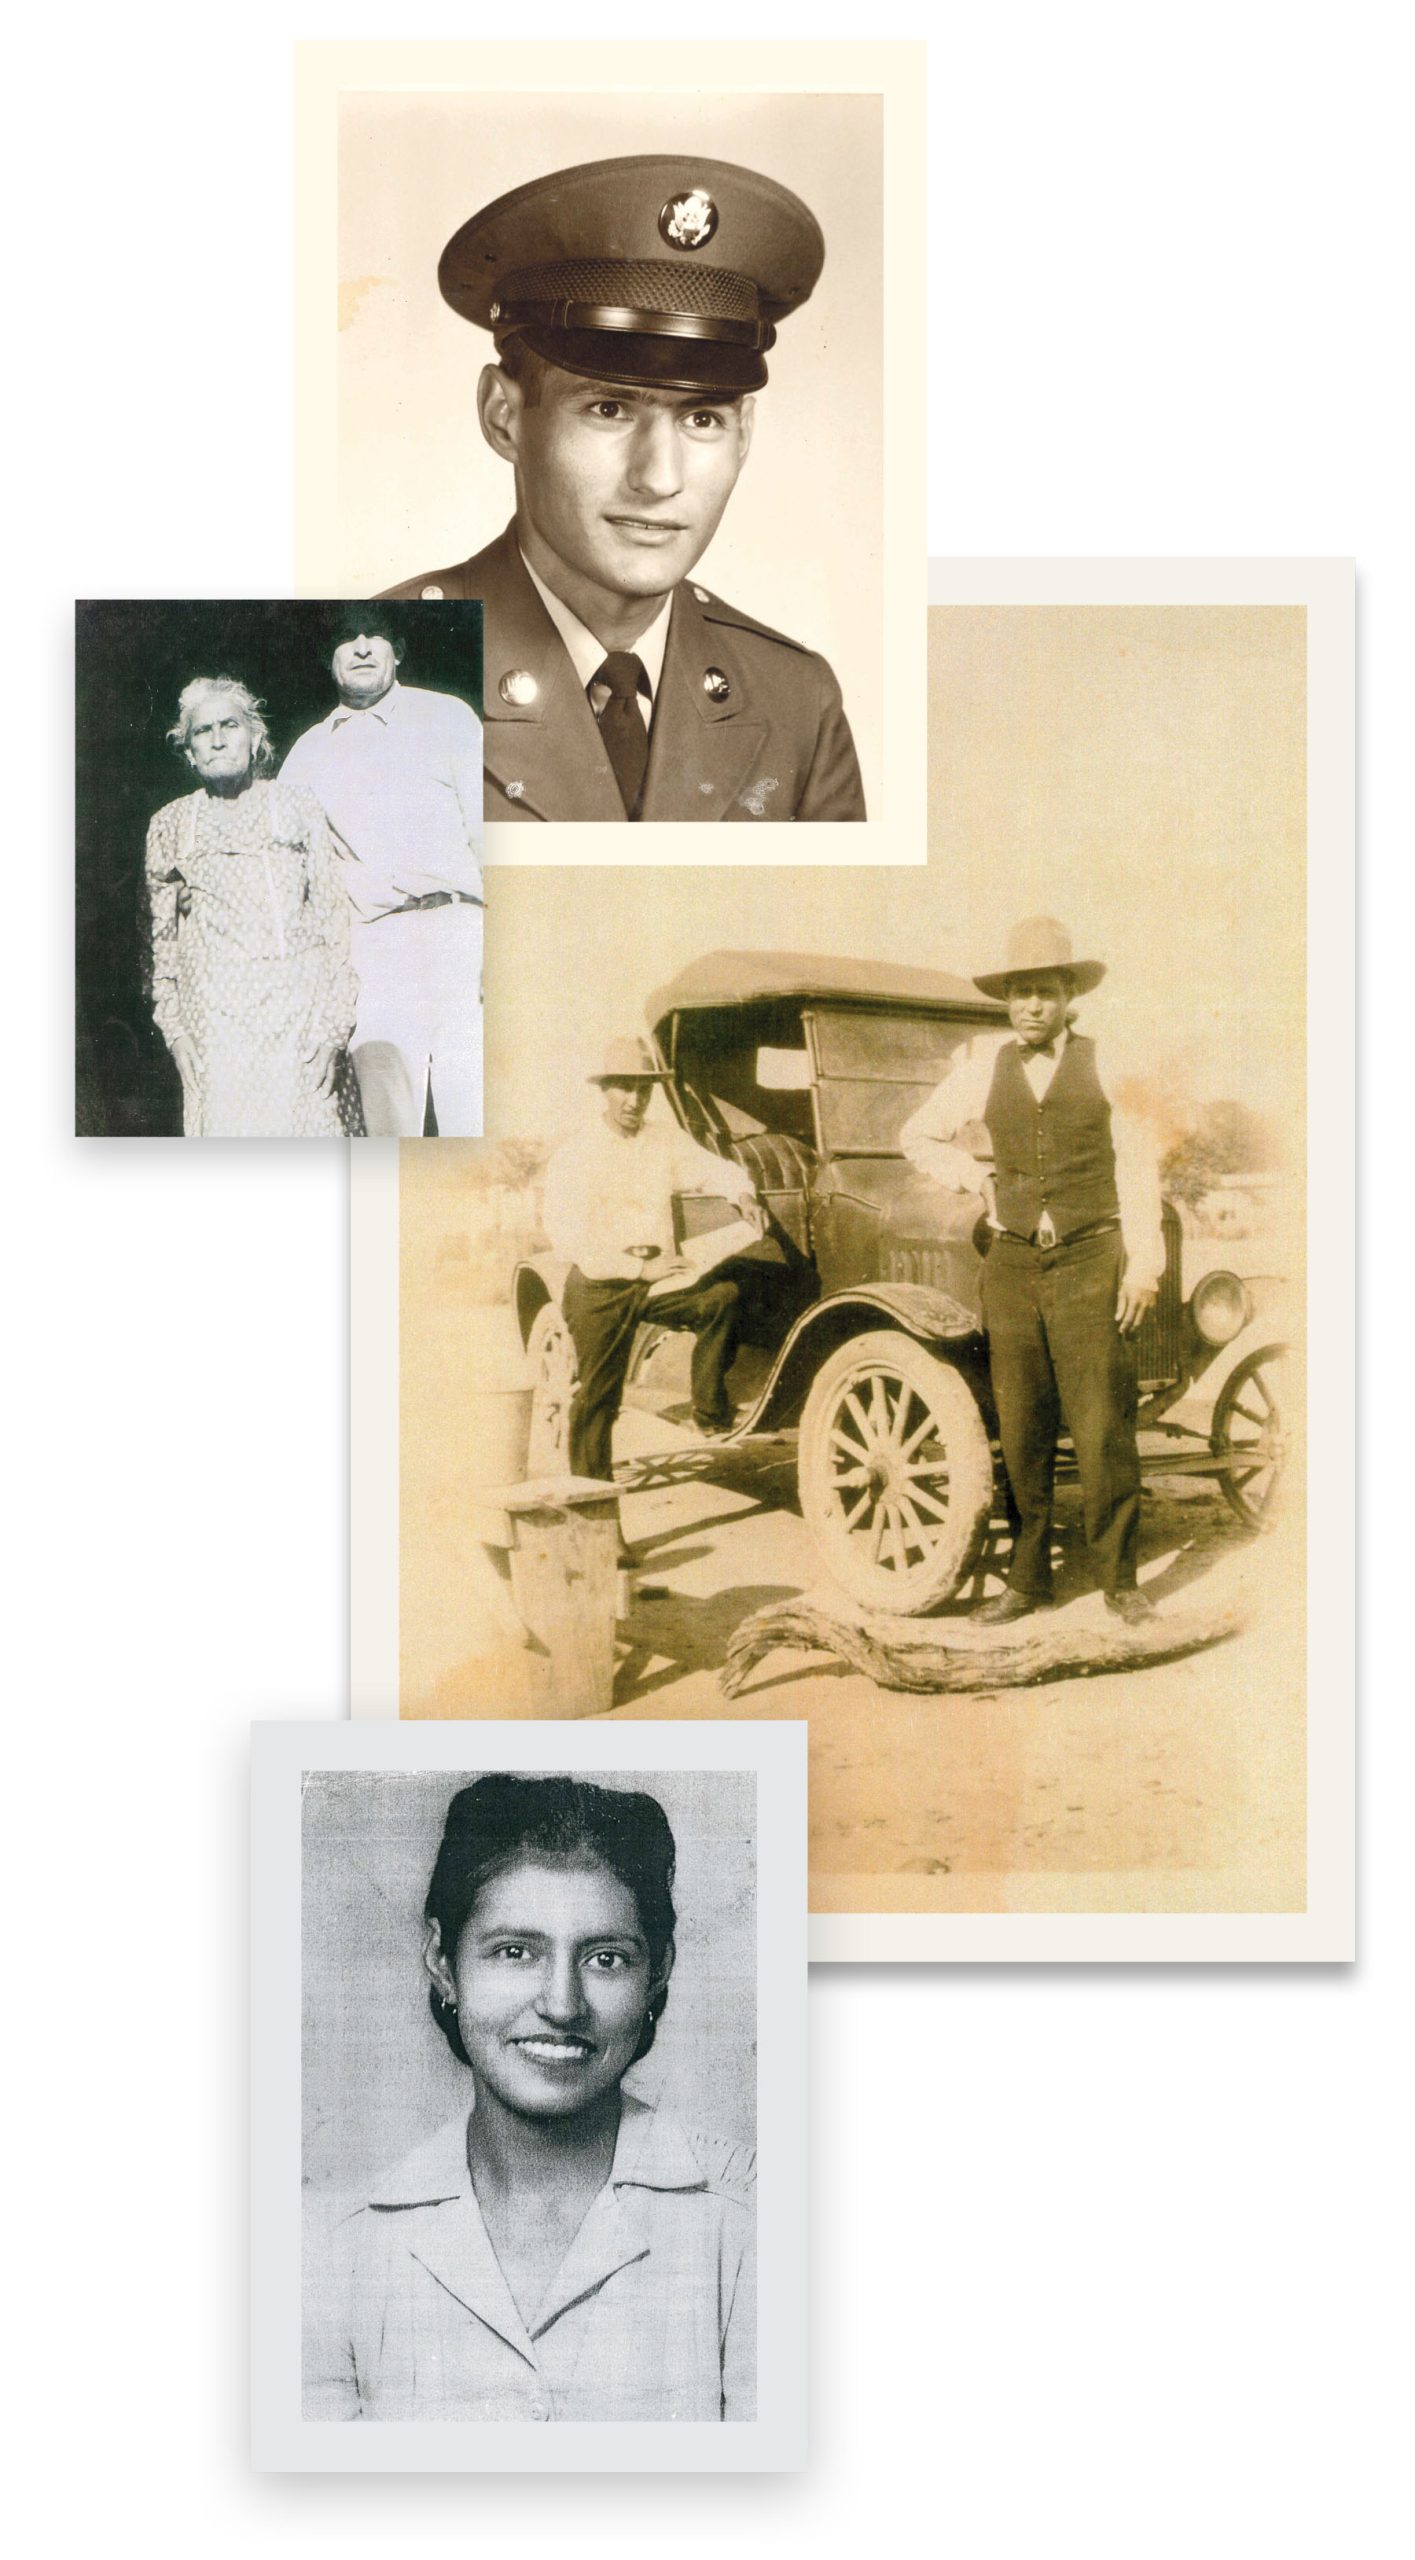 A collection of sepia-tone and black and white photographs of a man, two people in front of a vintage car, a woman, and a couple